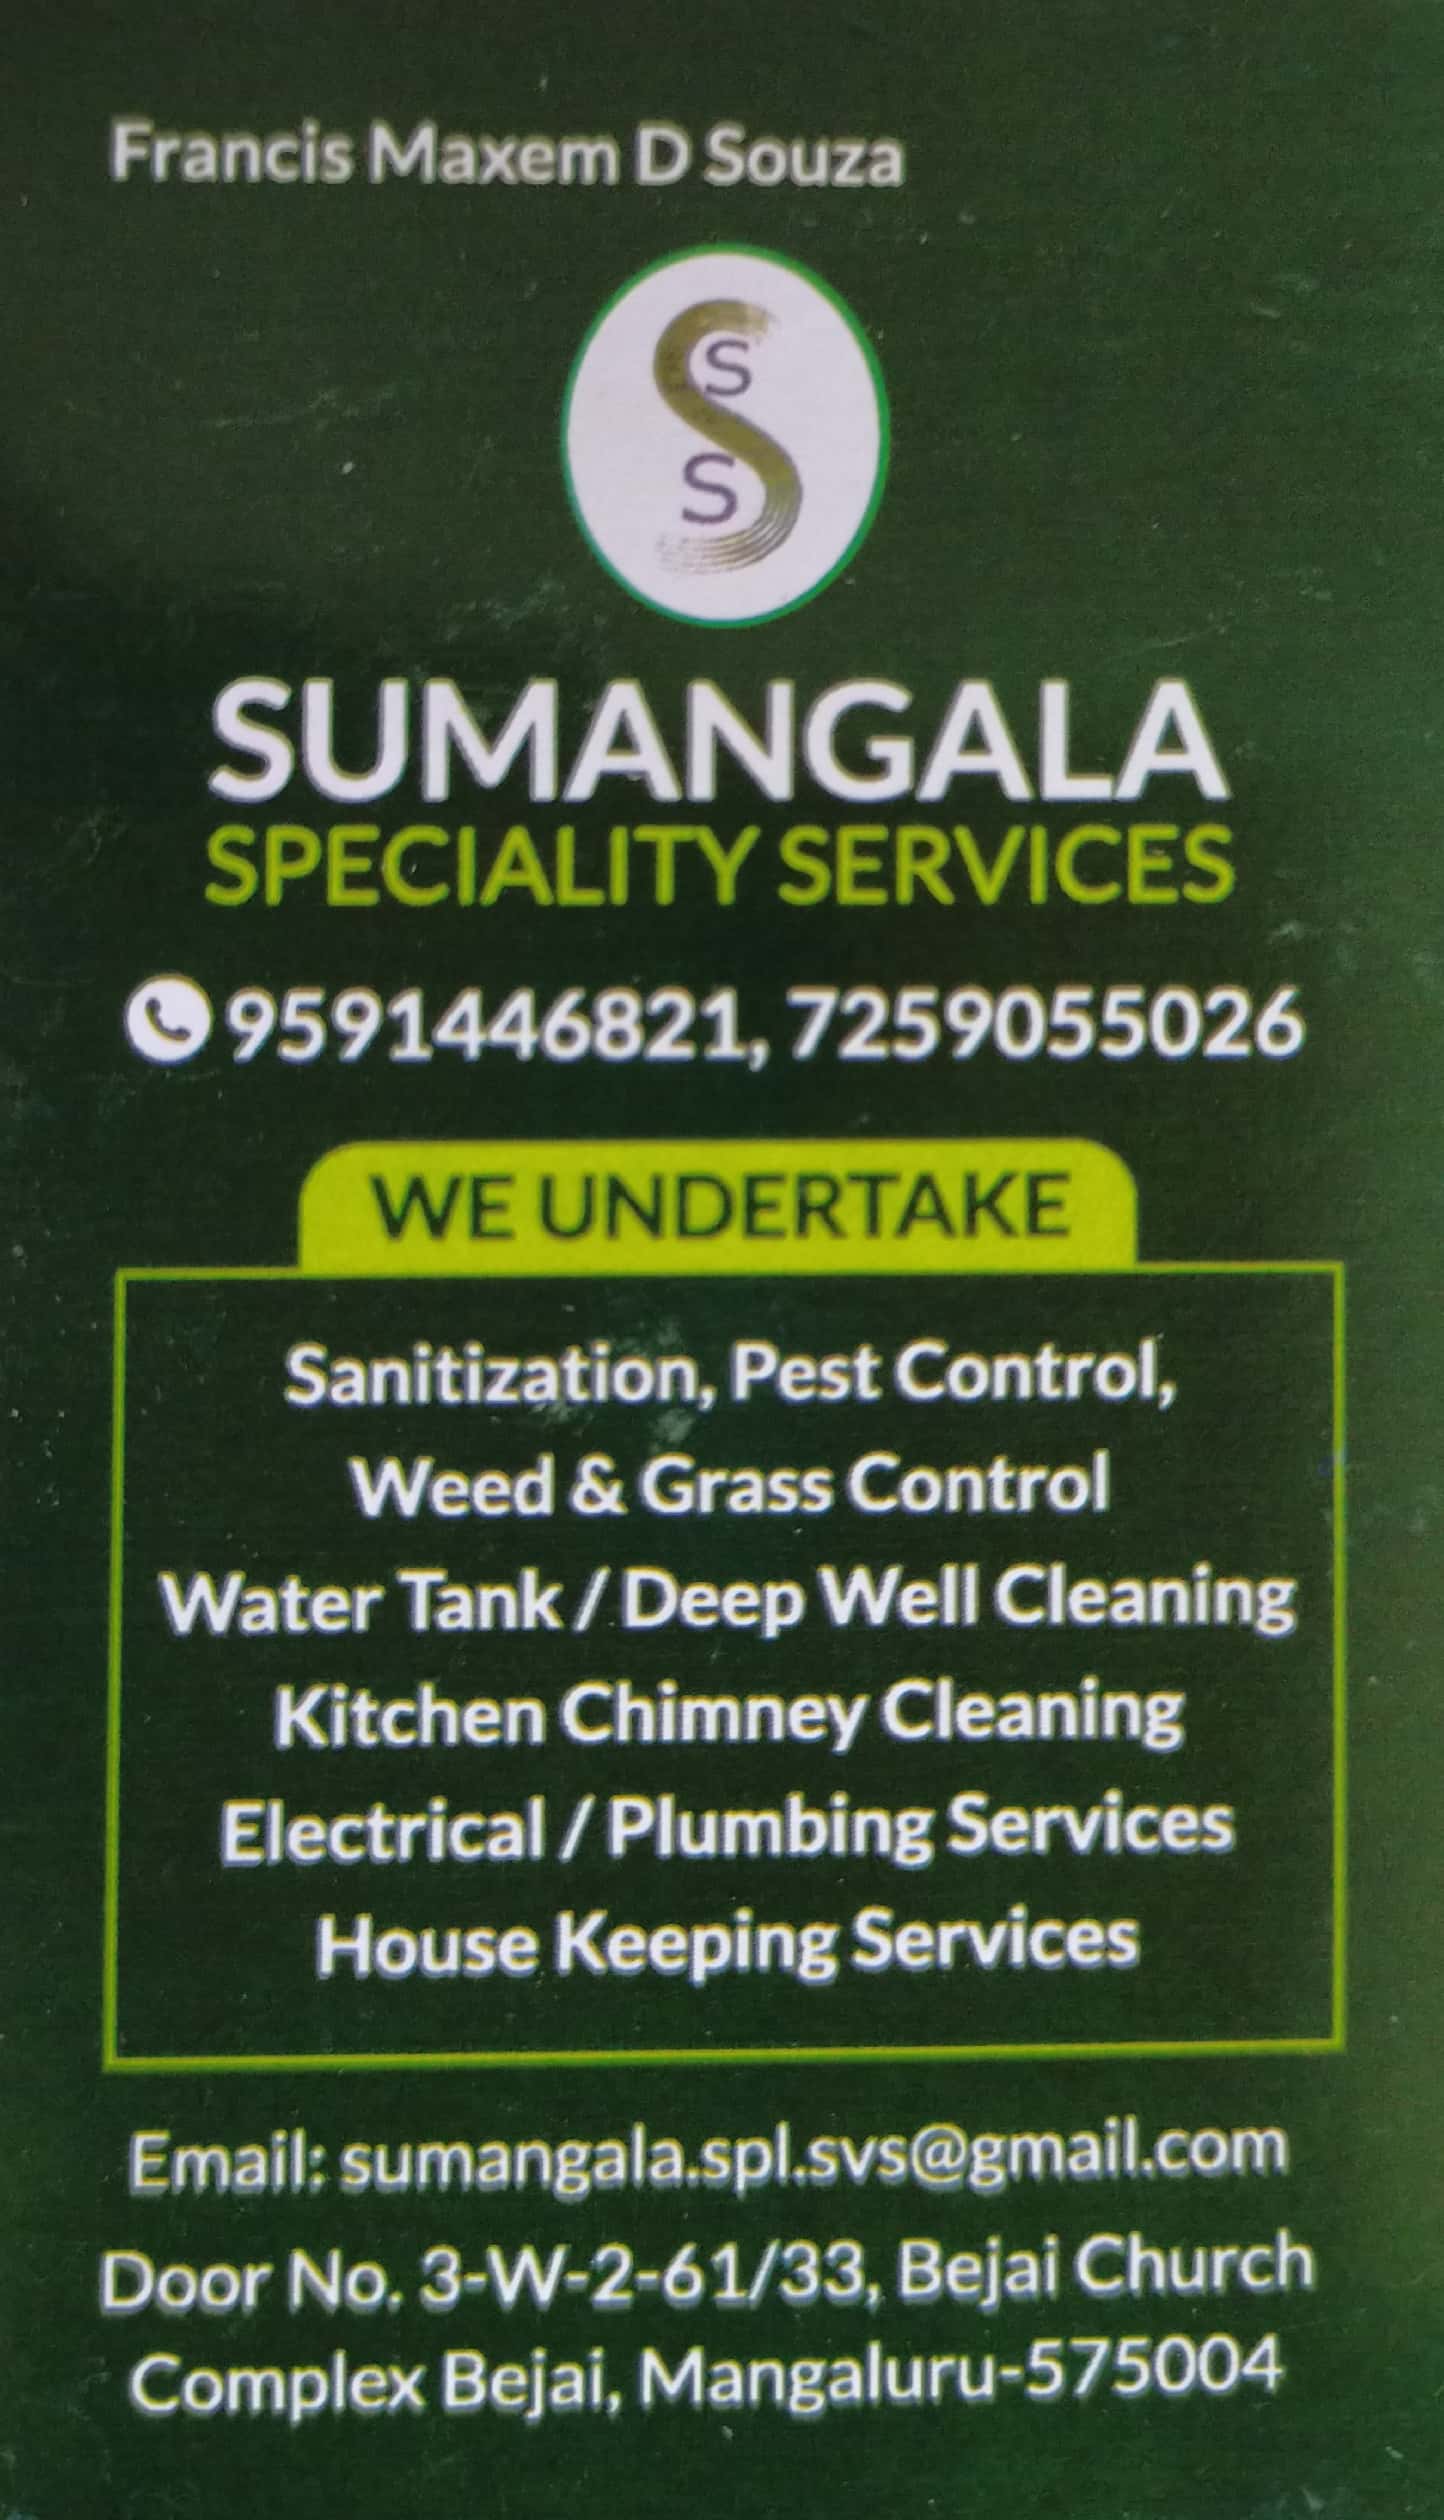 SUMANGALA SPECIALITY SERVICES